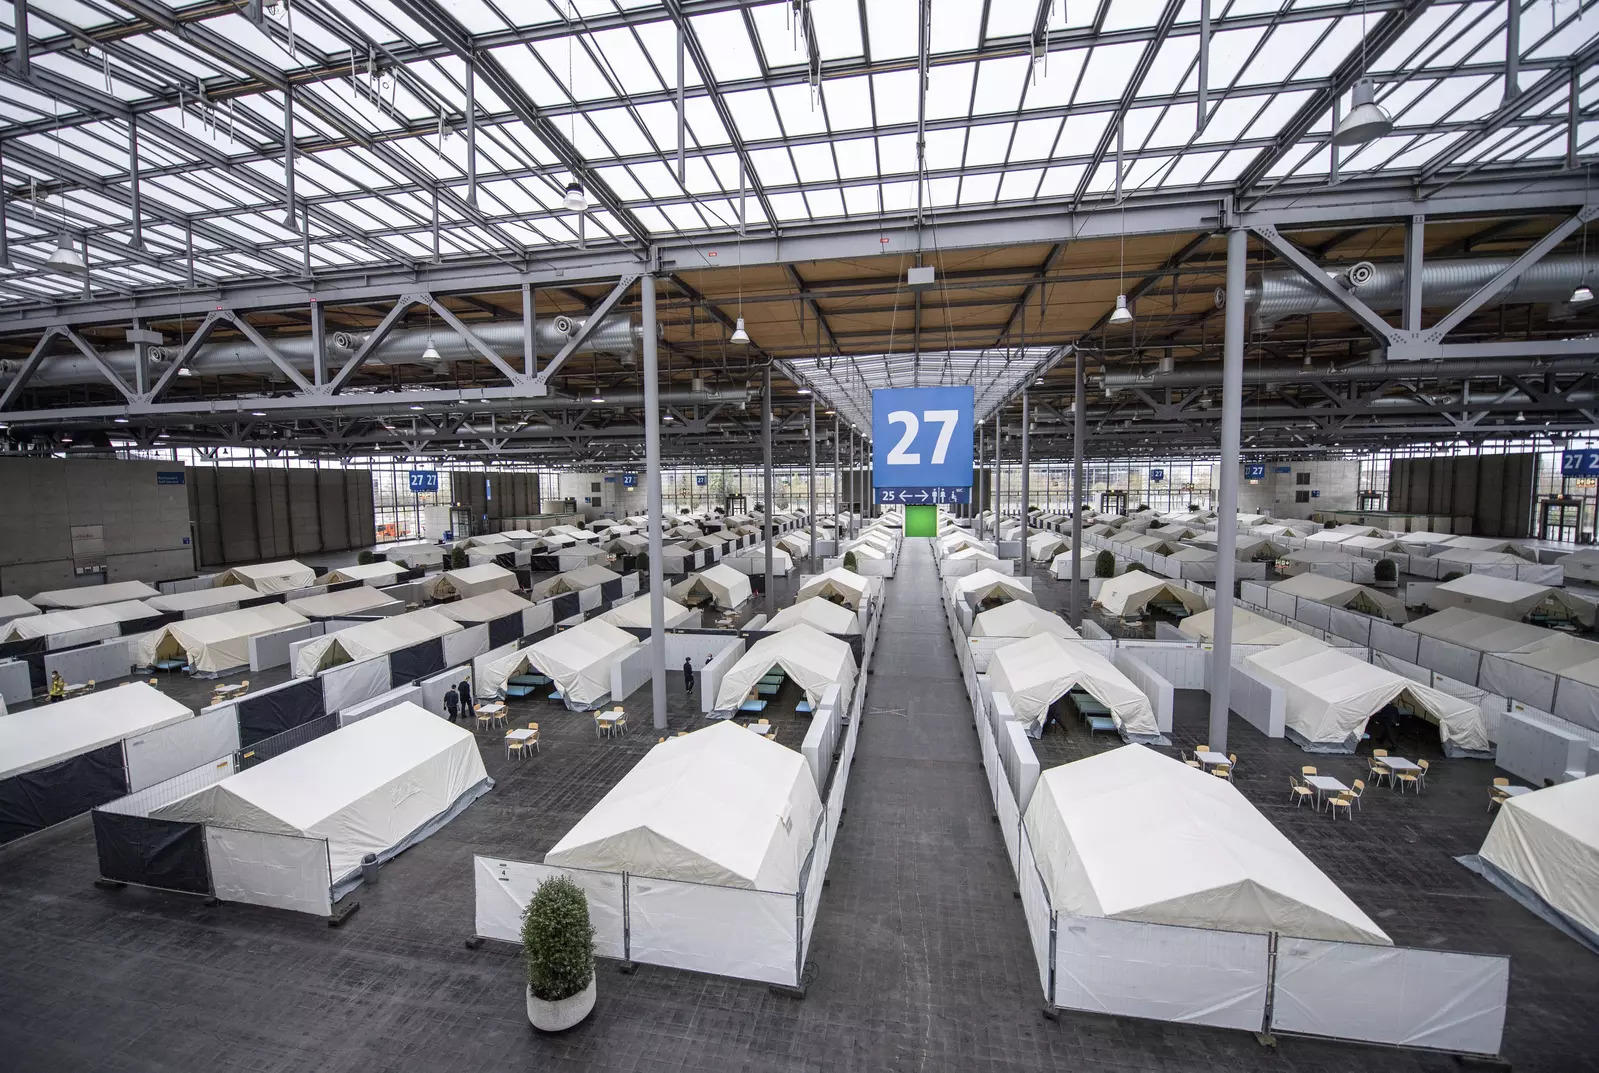 Tents are set up in preparation for the arrival of refugees from Ukraine in Hall 27 of the exhibition grounds in Hanover, Germany 